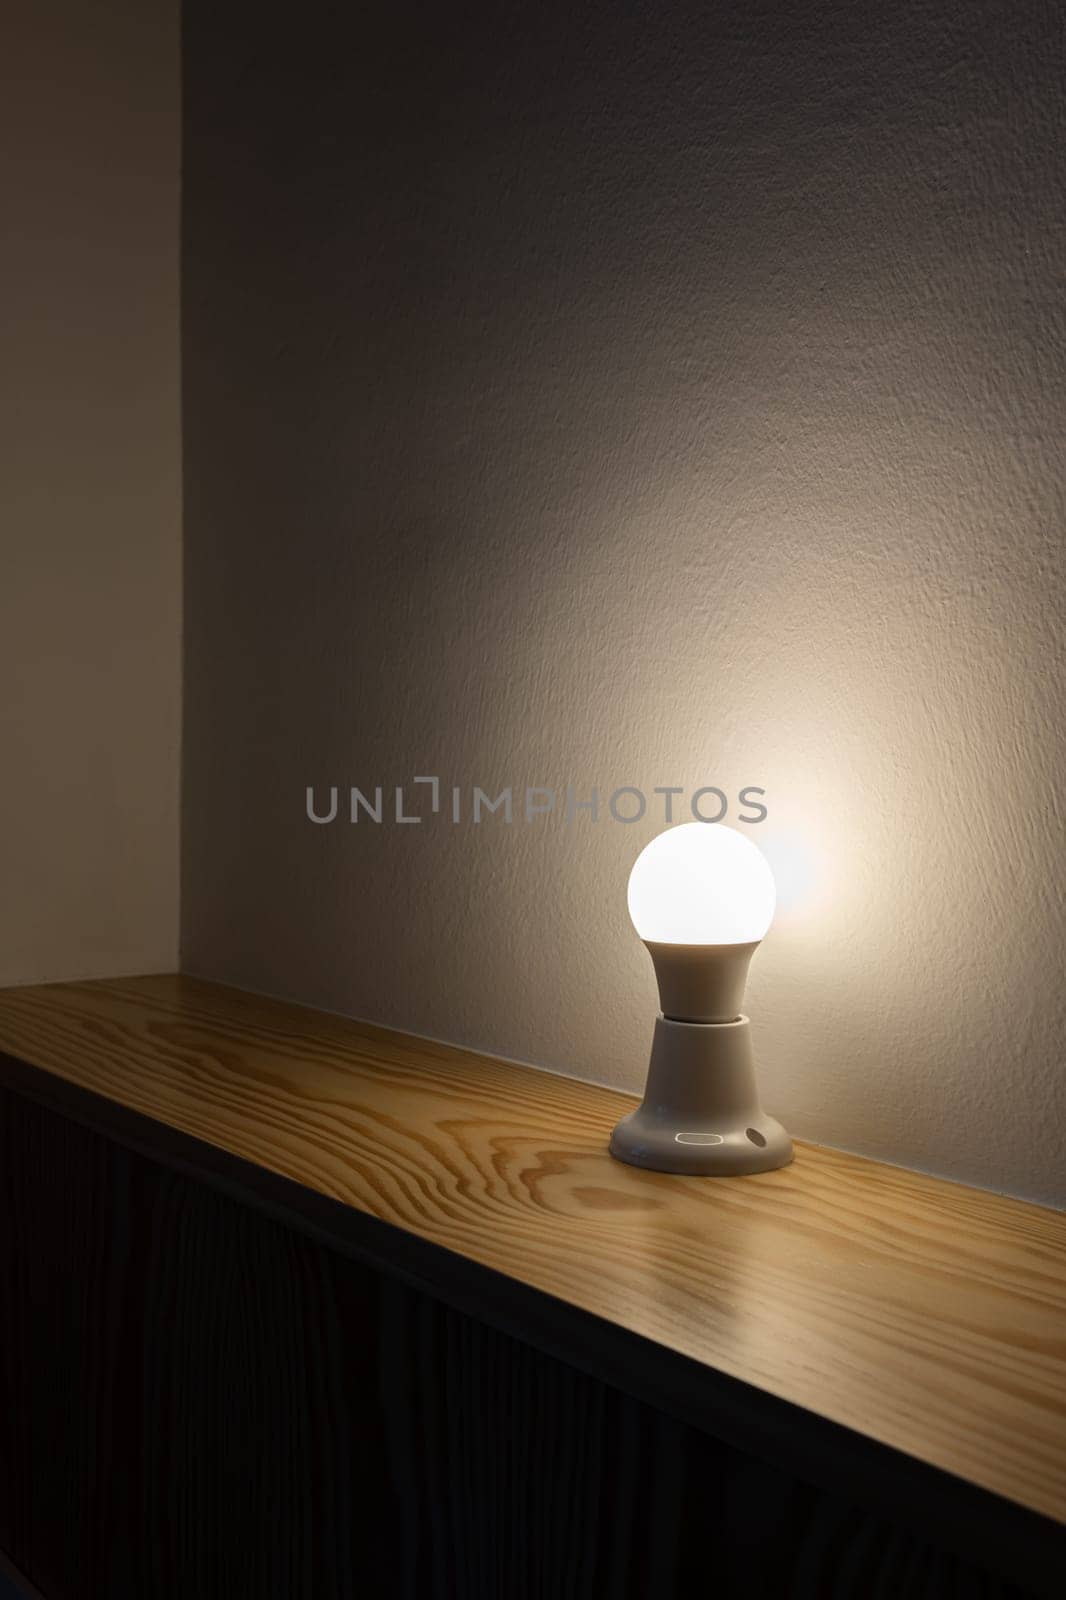 A lamp emits light on a hardwood furniture in a dimly lit room, surrounded by darkness.